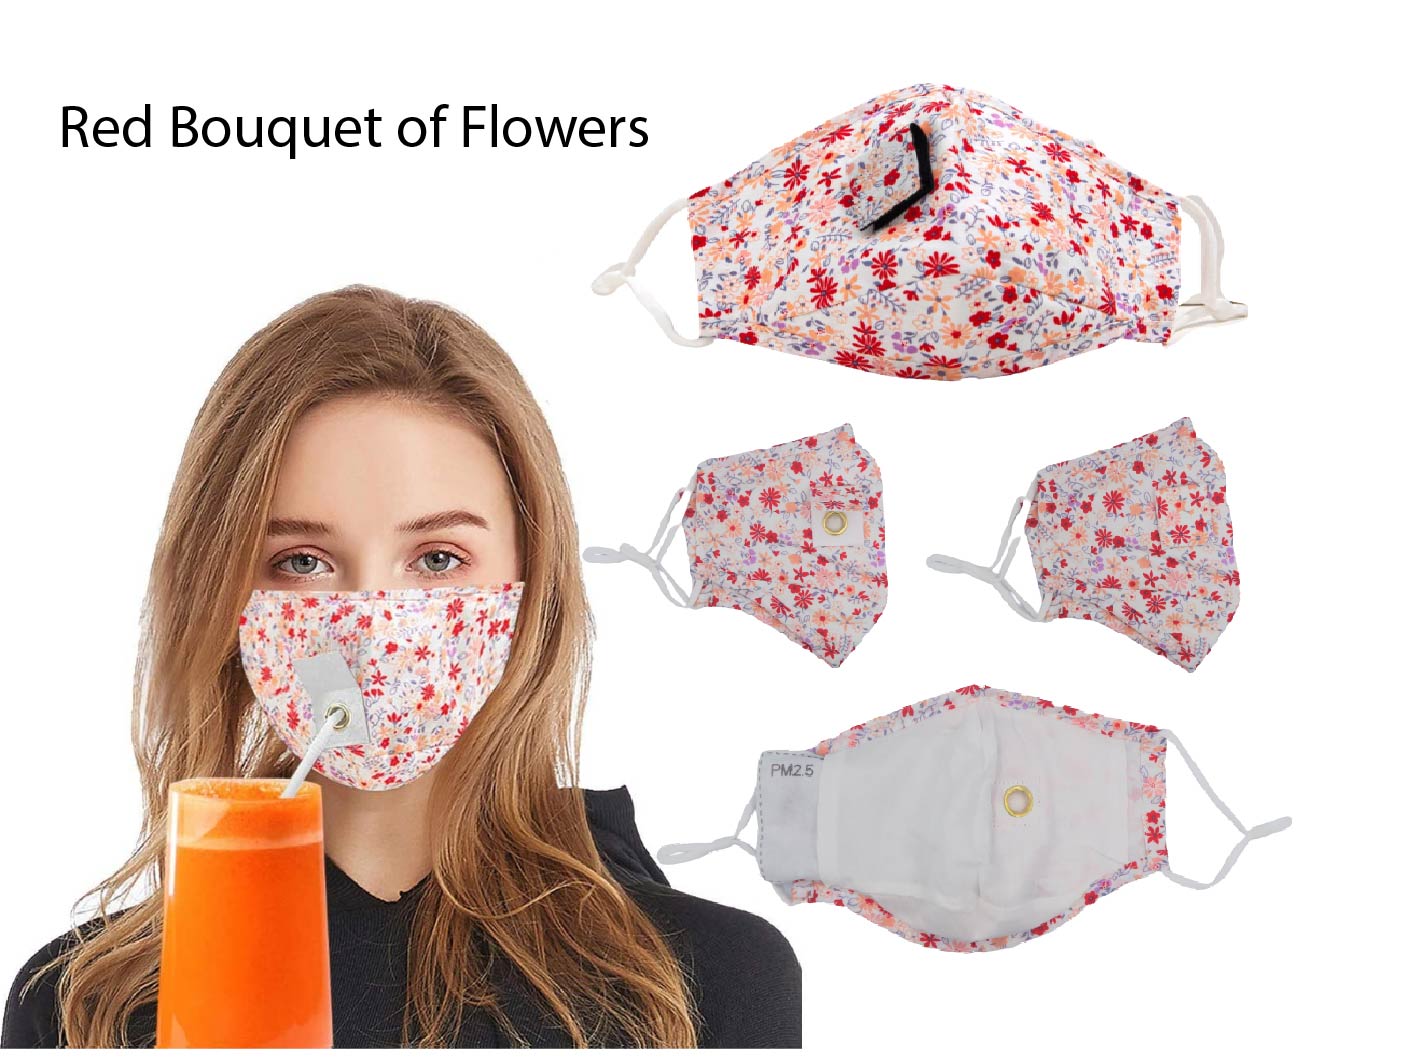 Cotton Face mask 1cm diameter opening for Straw face covering Choose fr 6 colours